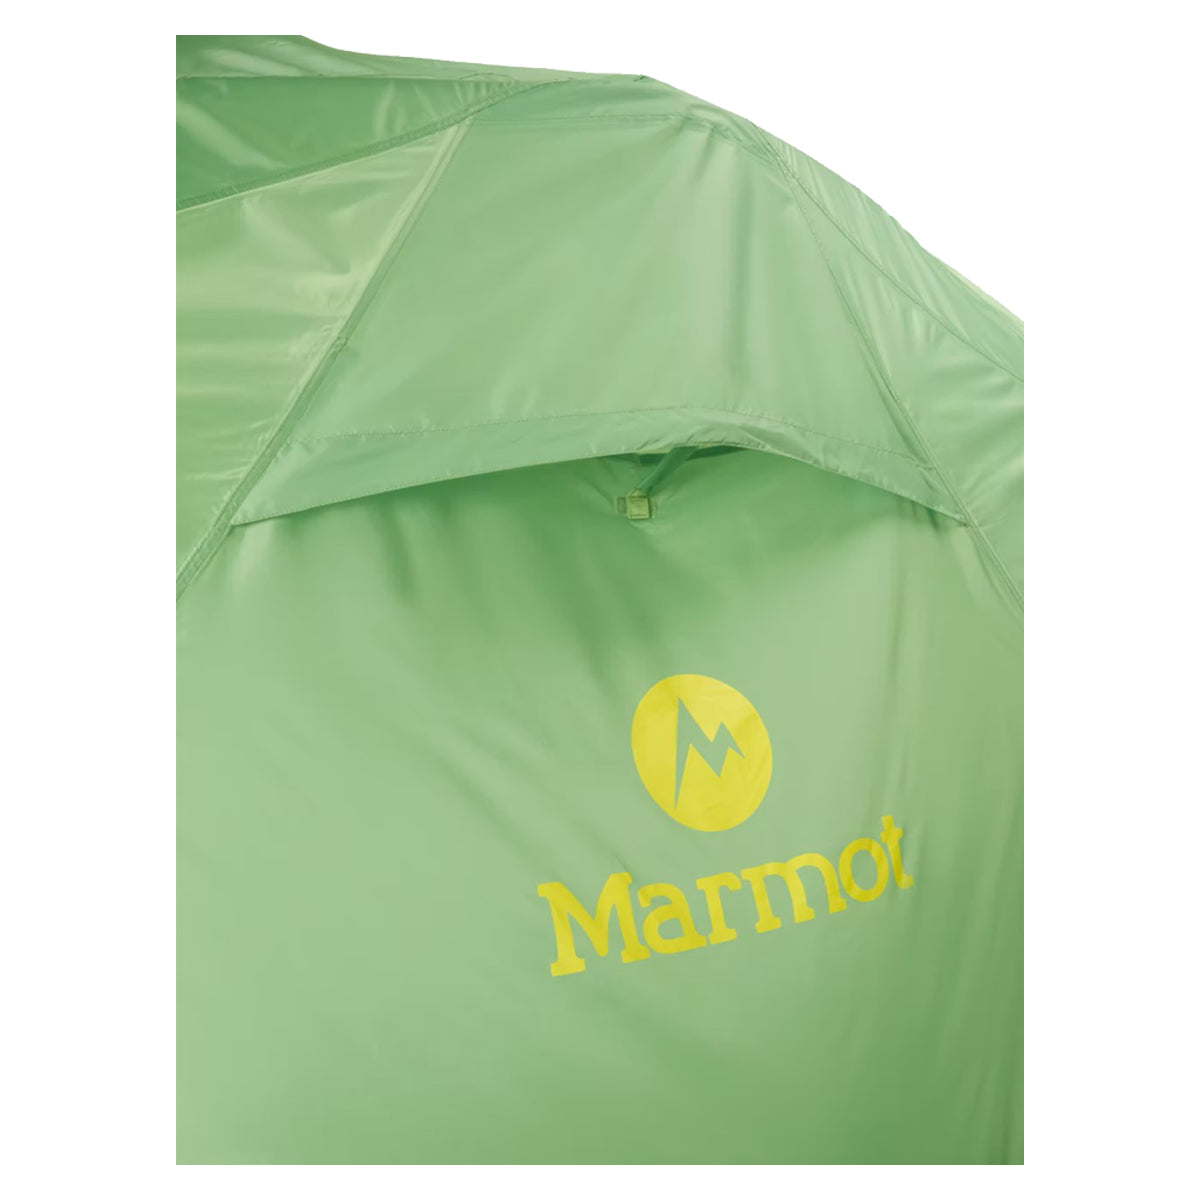 Marmot Limestone 6 Person Tent in  by GOHUNT | Marmot - GOHUNT Shop